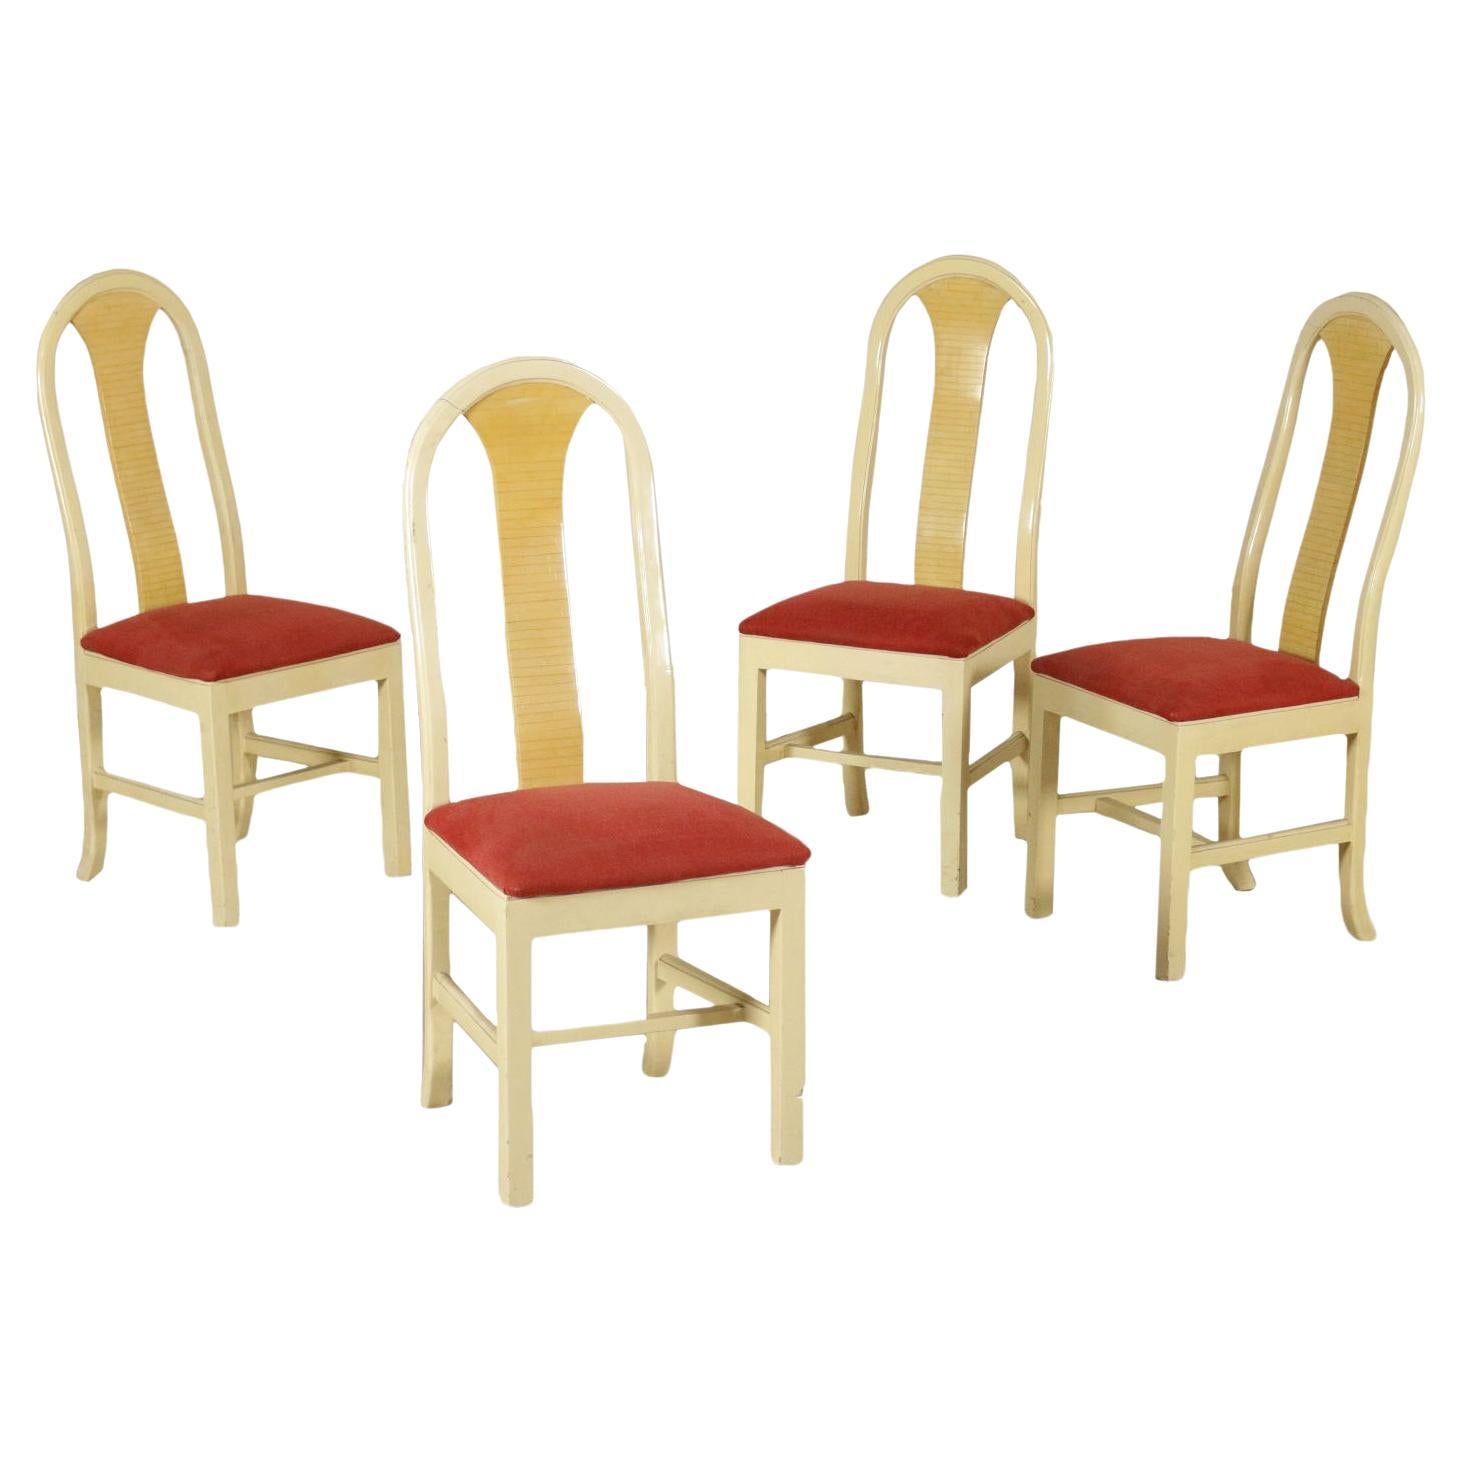 Group of 4 Chairs Wood Synthetic Material Foam Fabric Vintage, Italy, 1950s